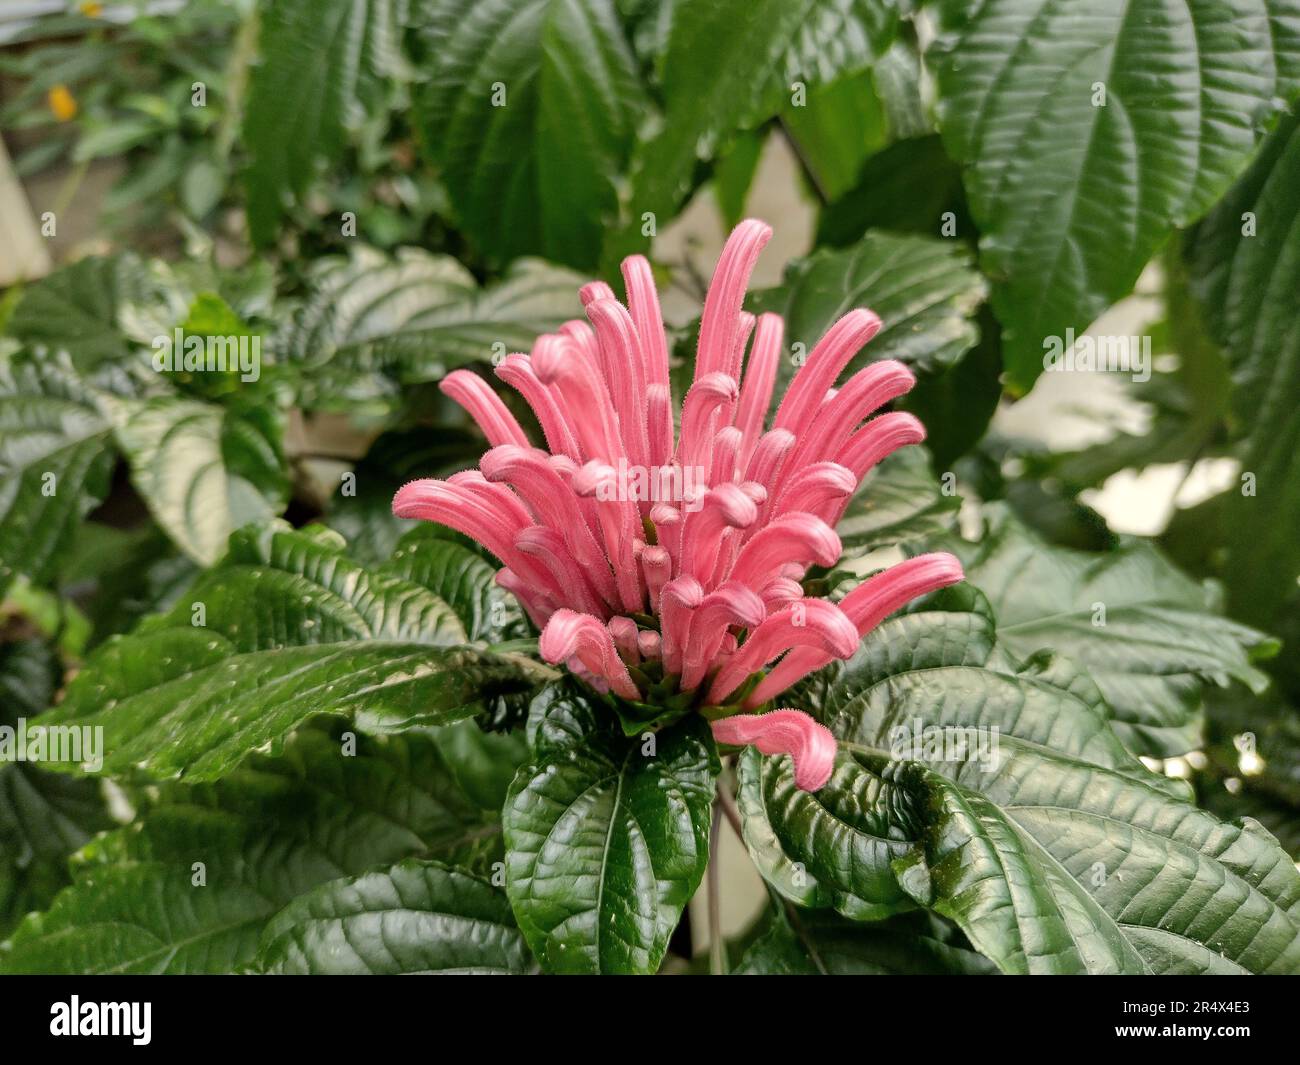 Justicia carnea flower at the botanical garden Stock Photo